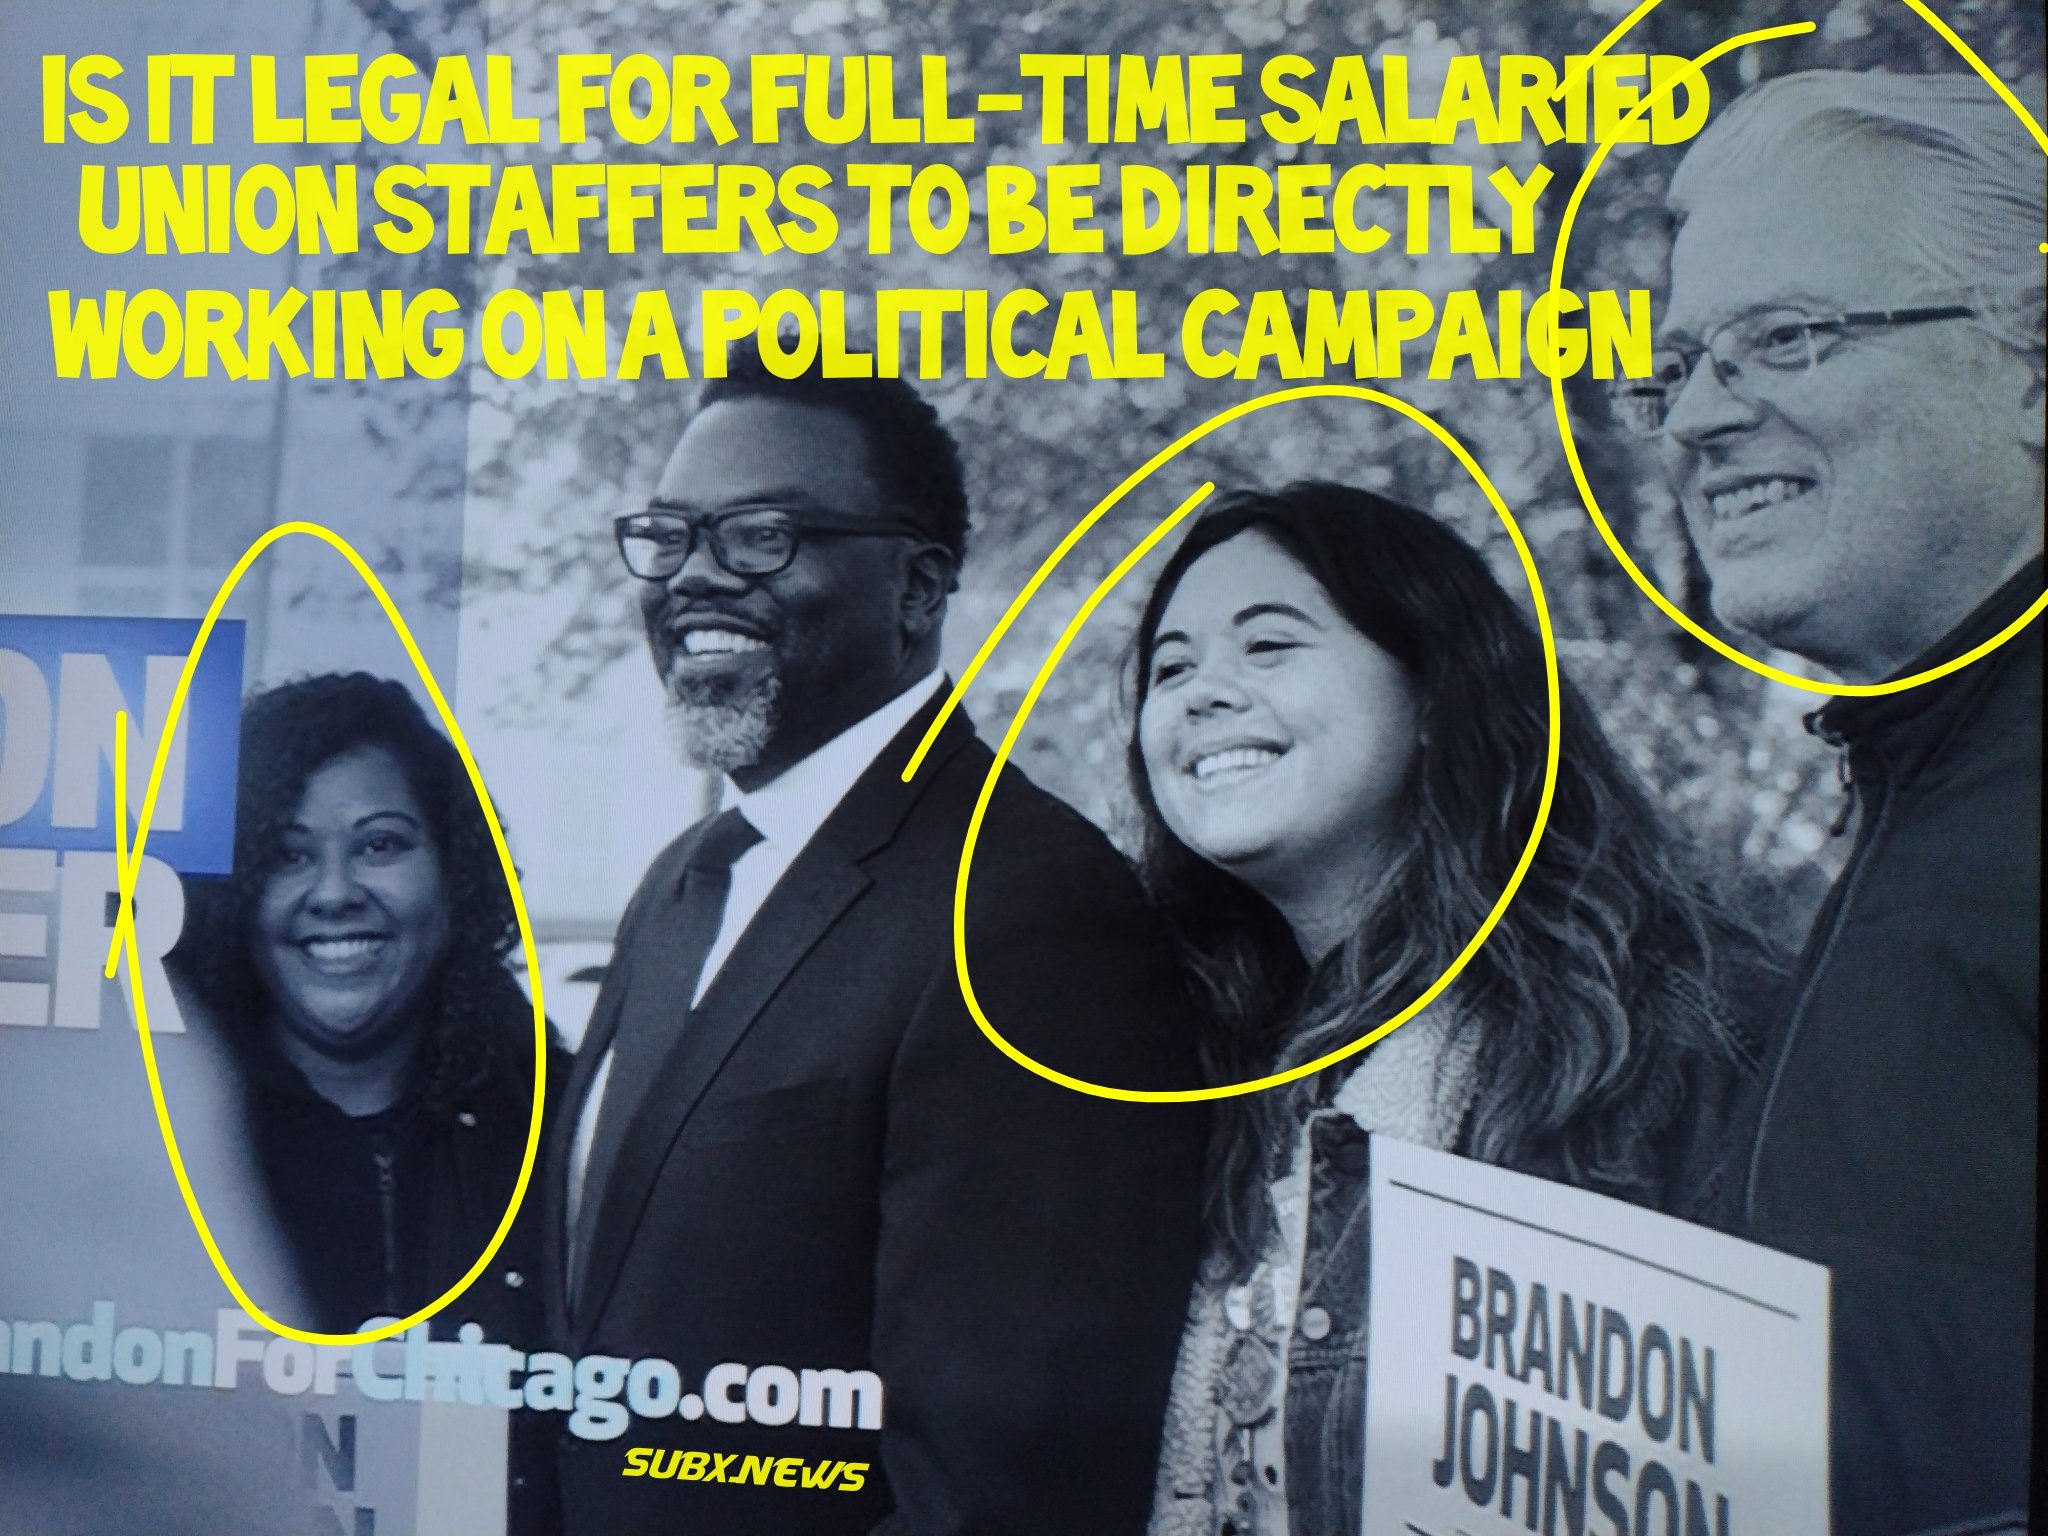 (left to right) Jhoanna Maldonado, Candidate for Mayor Brandon Johnson, Casey Sweeney, Jim Cavallero <br /><br />All are paid ctu orgnizers last we checked but the CTU has stopped publishing a directory of employees for a fews years now, so we can not really track who is working at the Union anymore.